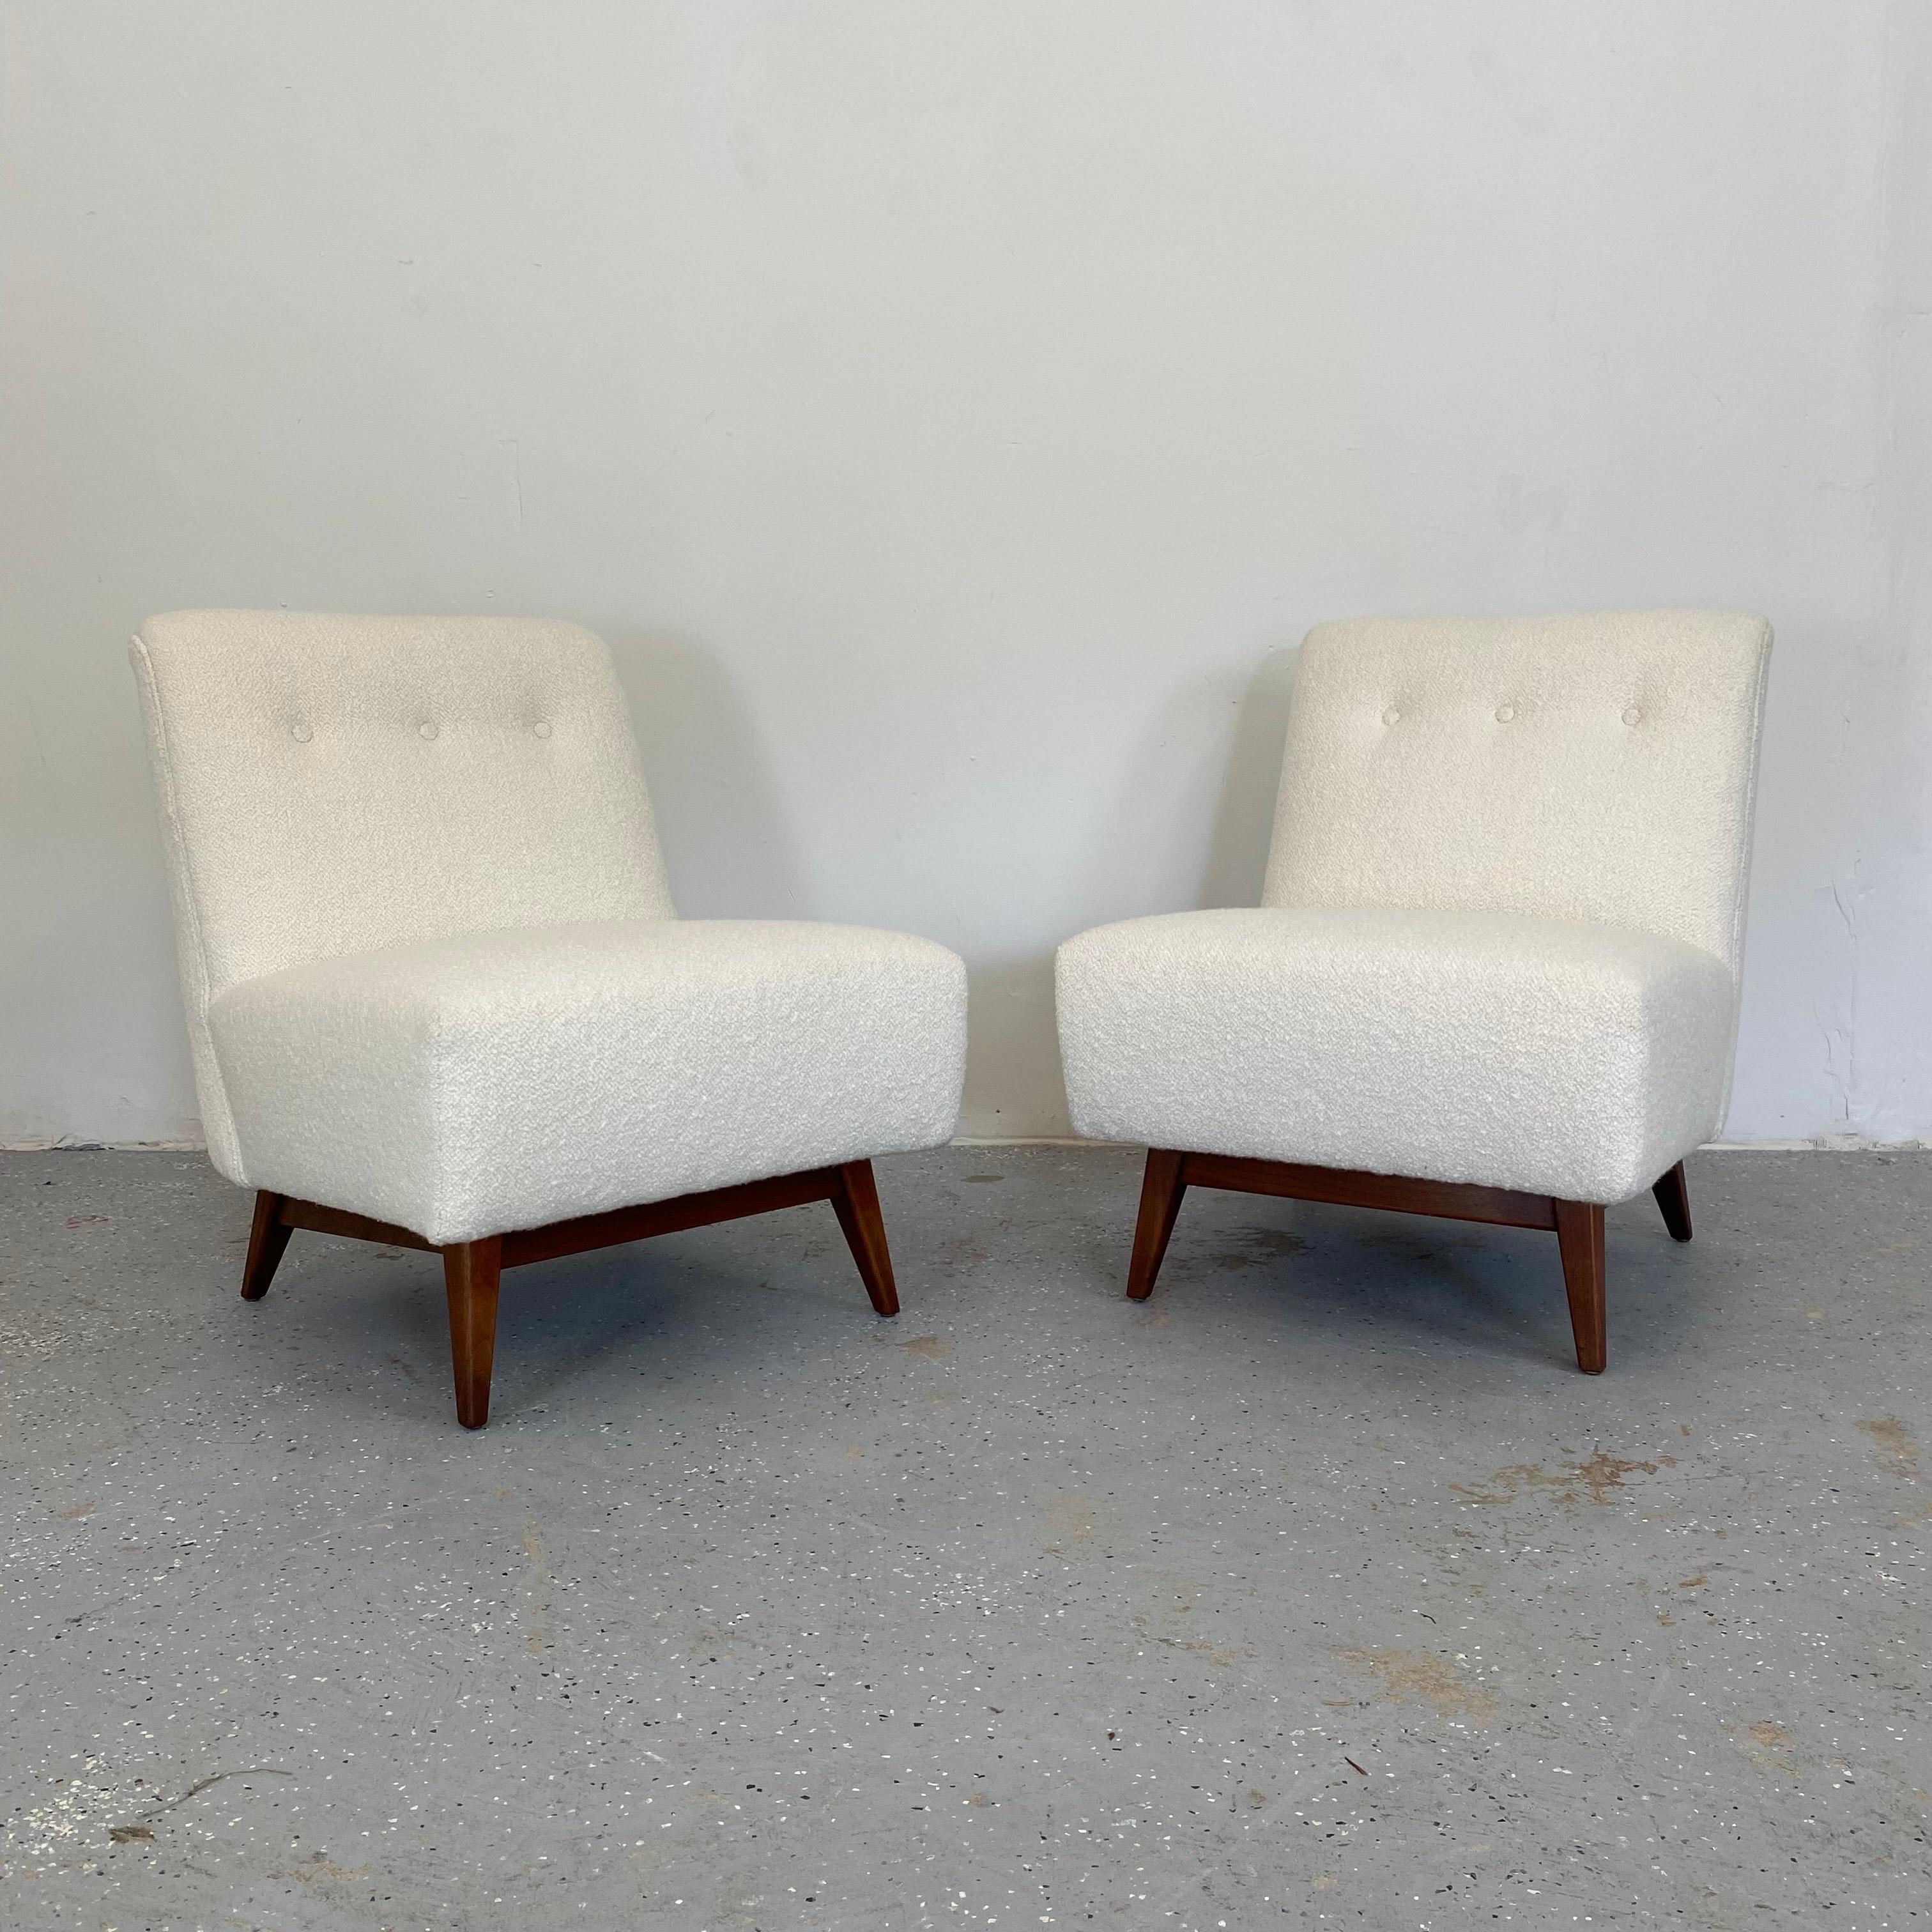 Sleek lounge chairs from Jens Risom newly upholstered in a luxurious boucle atop walnut frames. A classic mid century modern look to this pair.